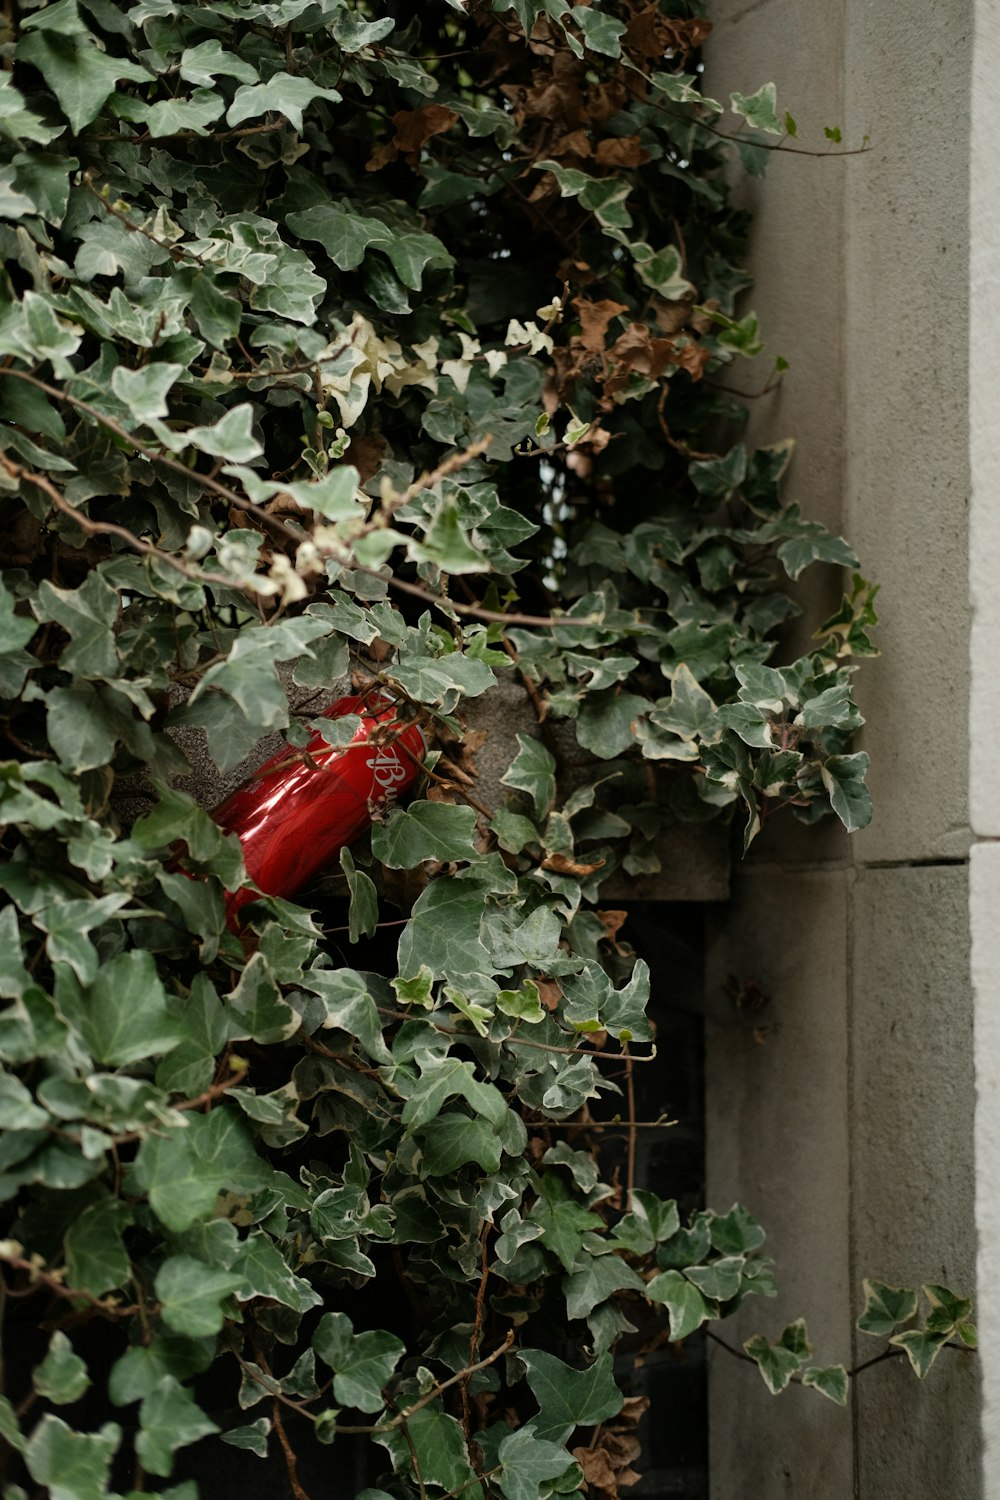 a red fire hydrant sitting on top of a lush green plant